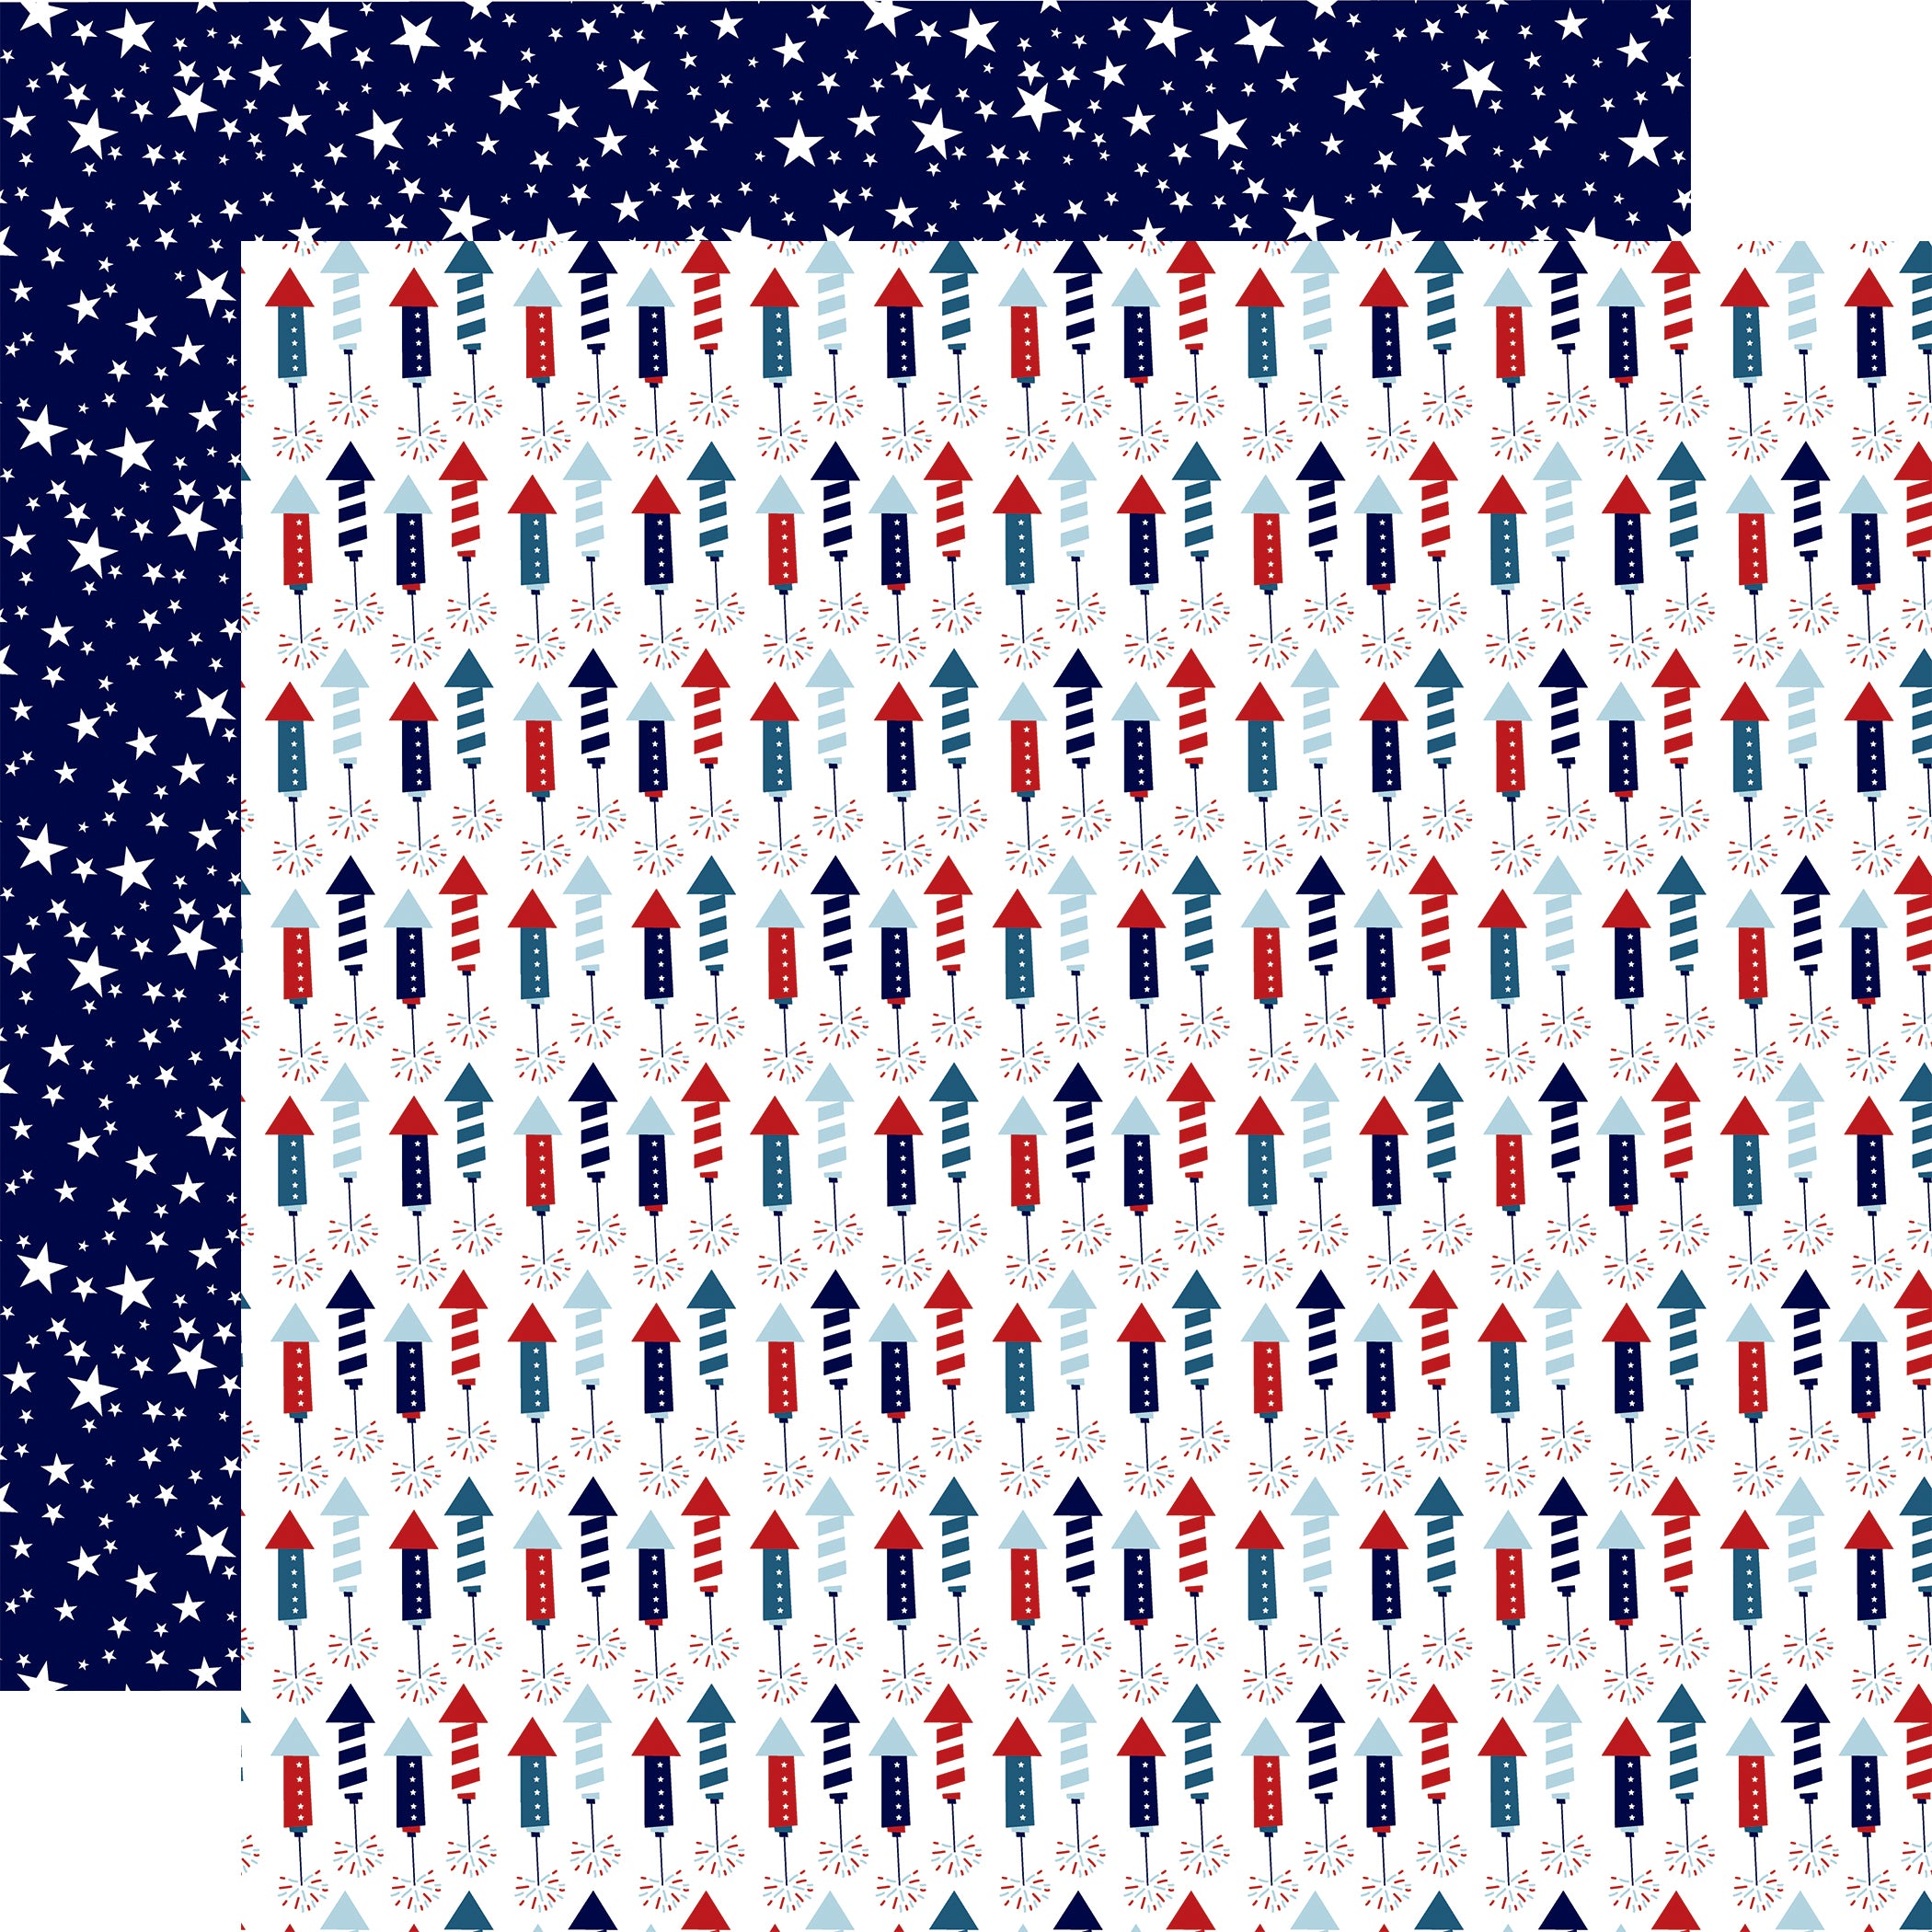 Stars and Stripes Forever Collection Sky Rocket Show 12 x 12 Double-Sided Scrapbook Paper by Echo Park Paper